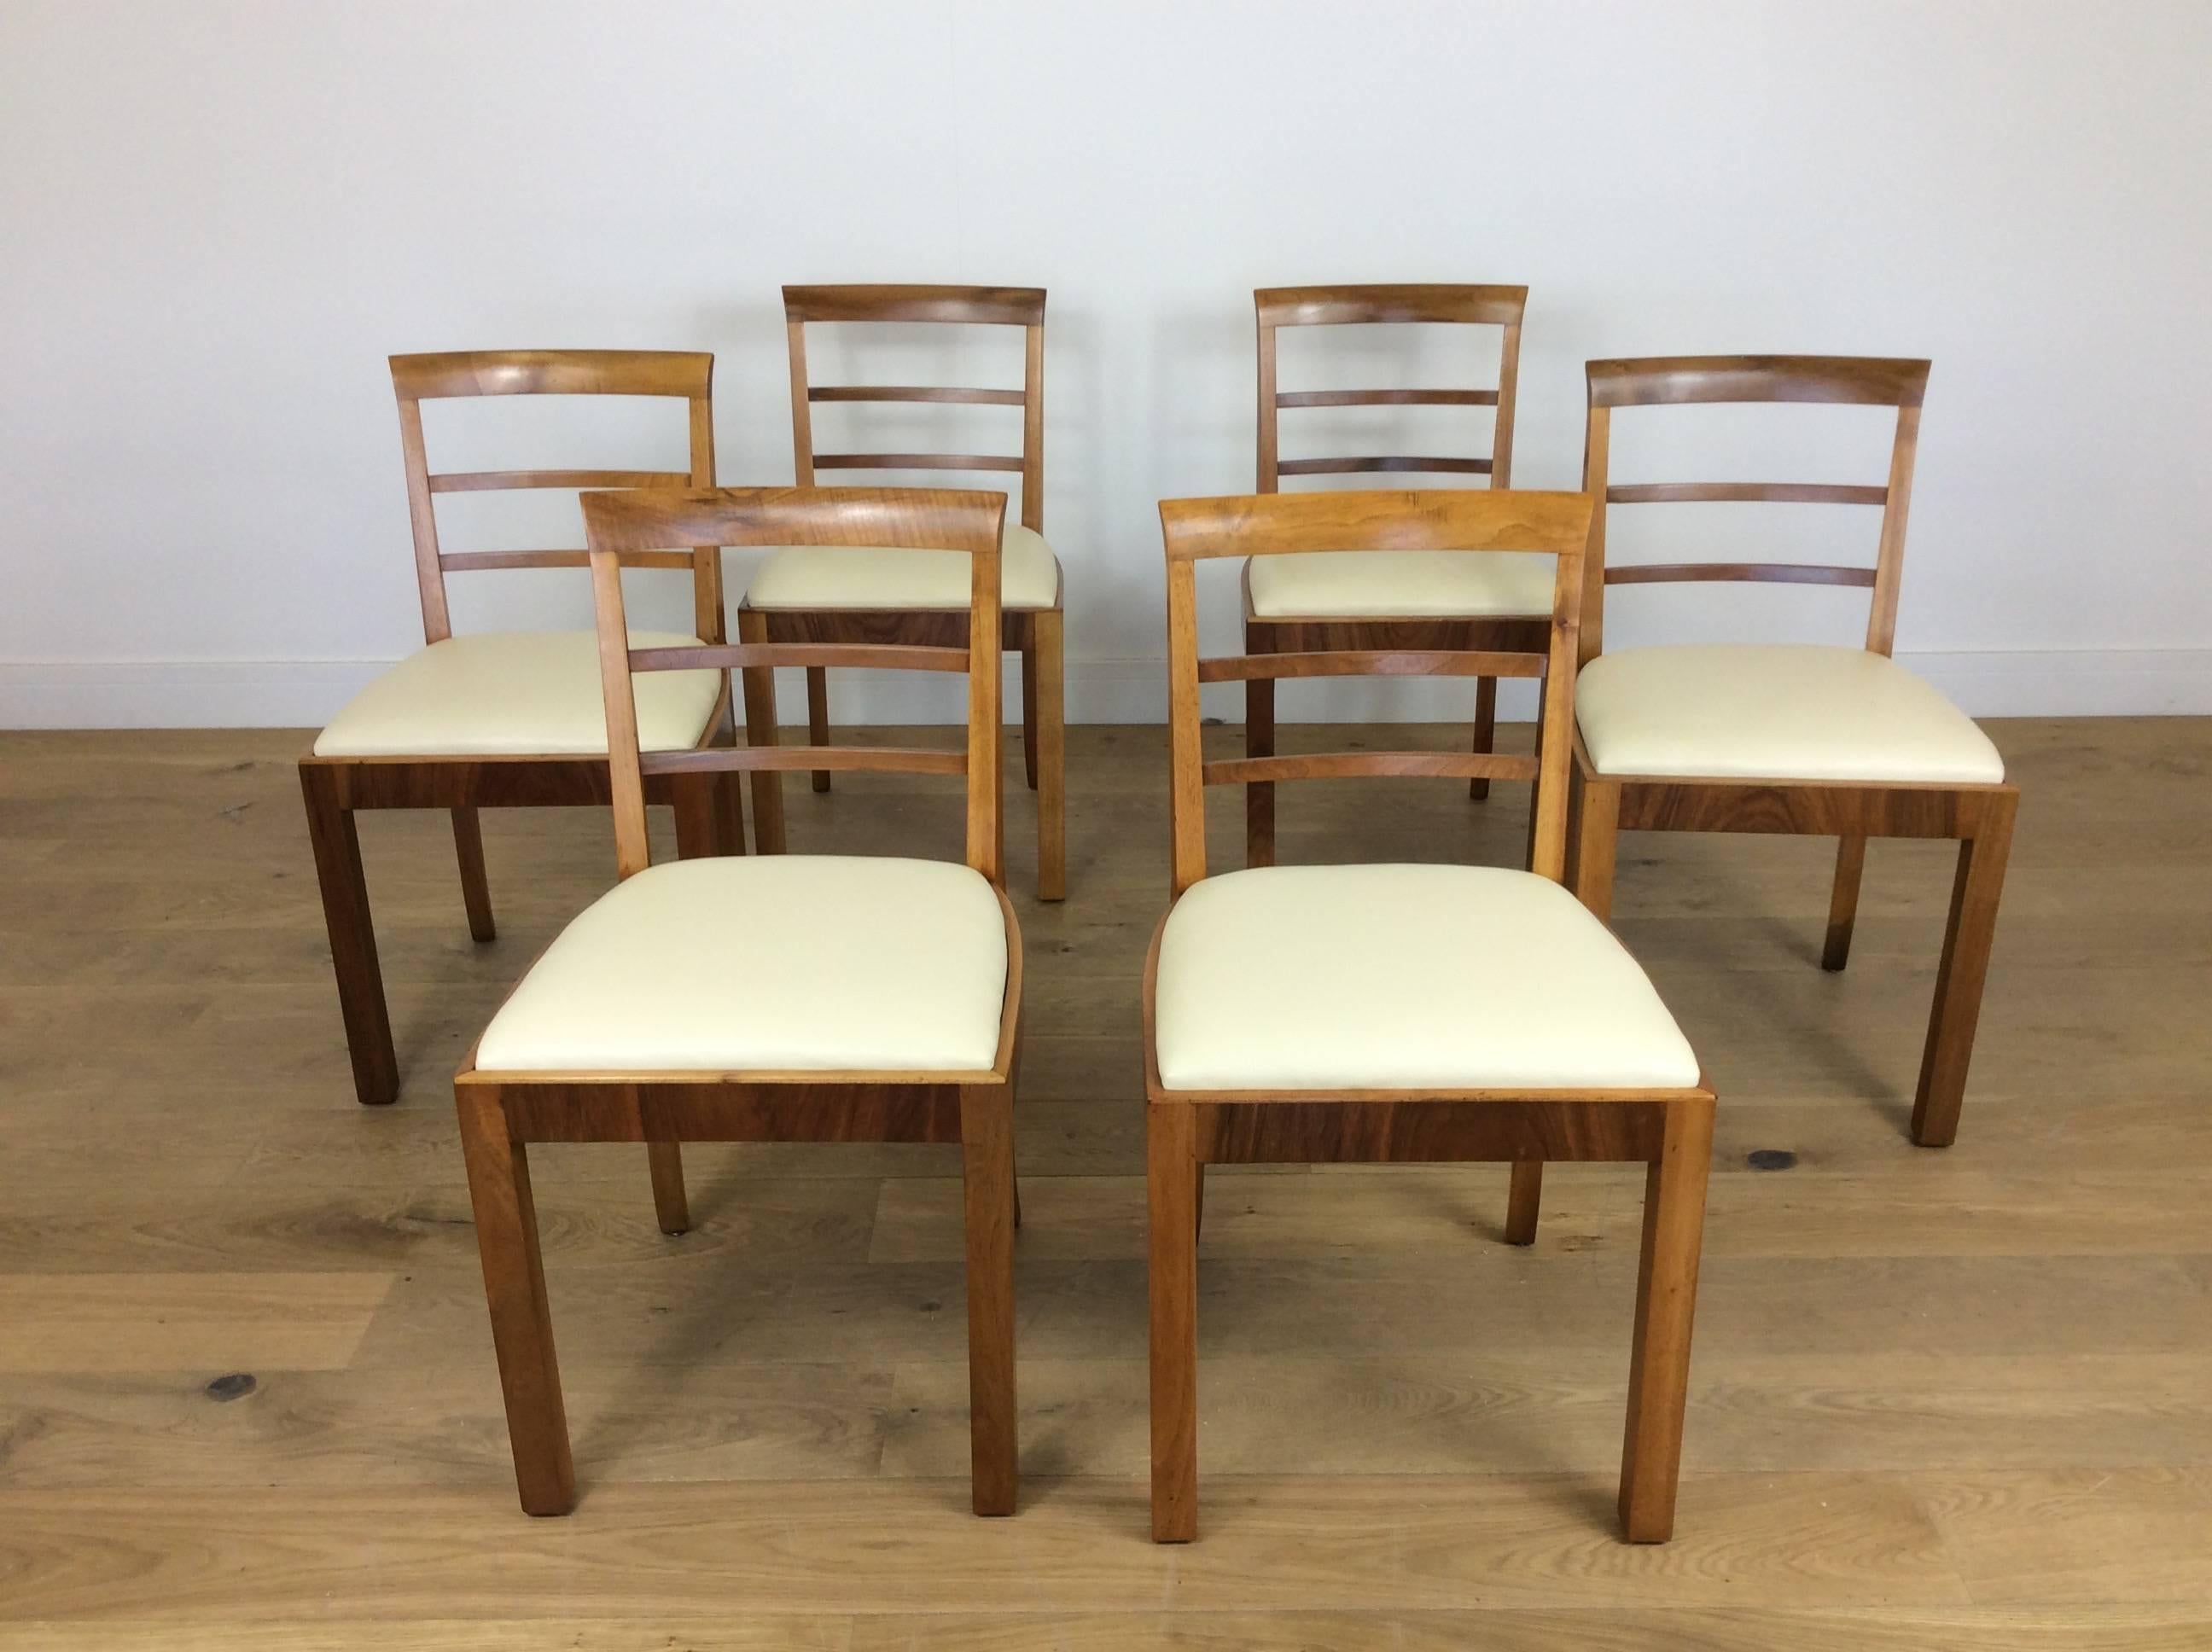 Art Deco dining chairs
A set of six Art Deco walnut dining chairs.
Walnut framed dining chairs with drop in newly upholstered leather seats, all re polished to an original finish.
British, circa 1930
Measures: 82 cm H, 45 cm W, 45 cm D, seat H